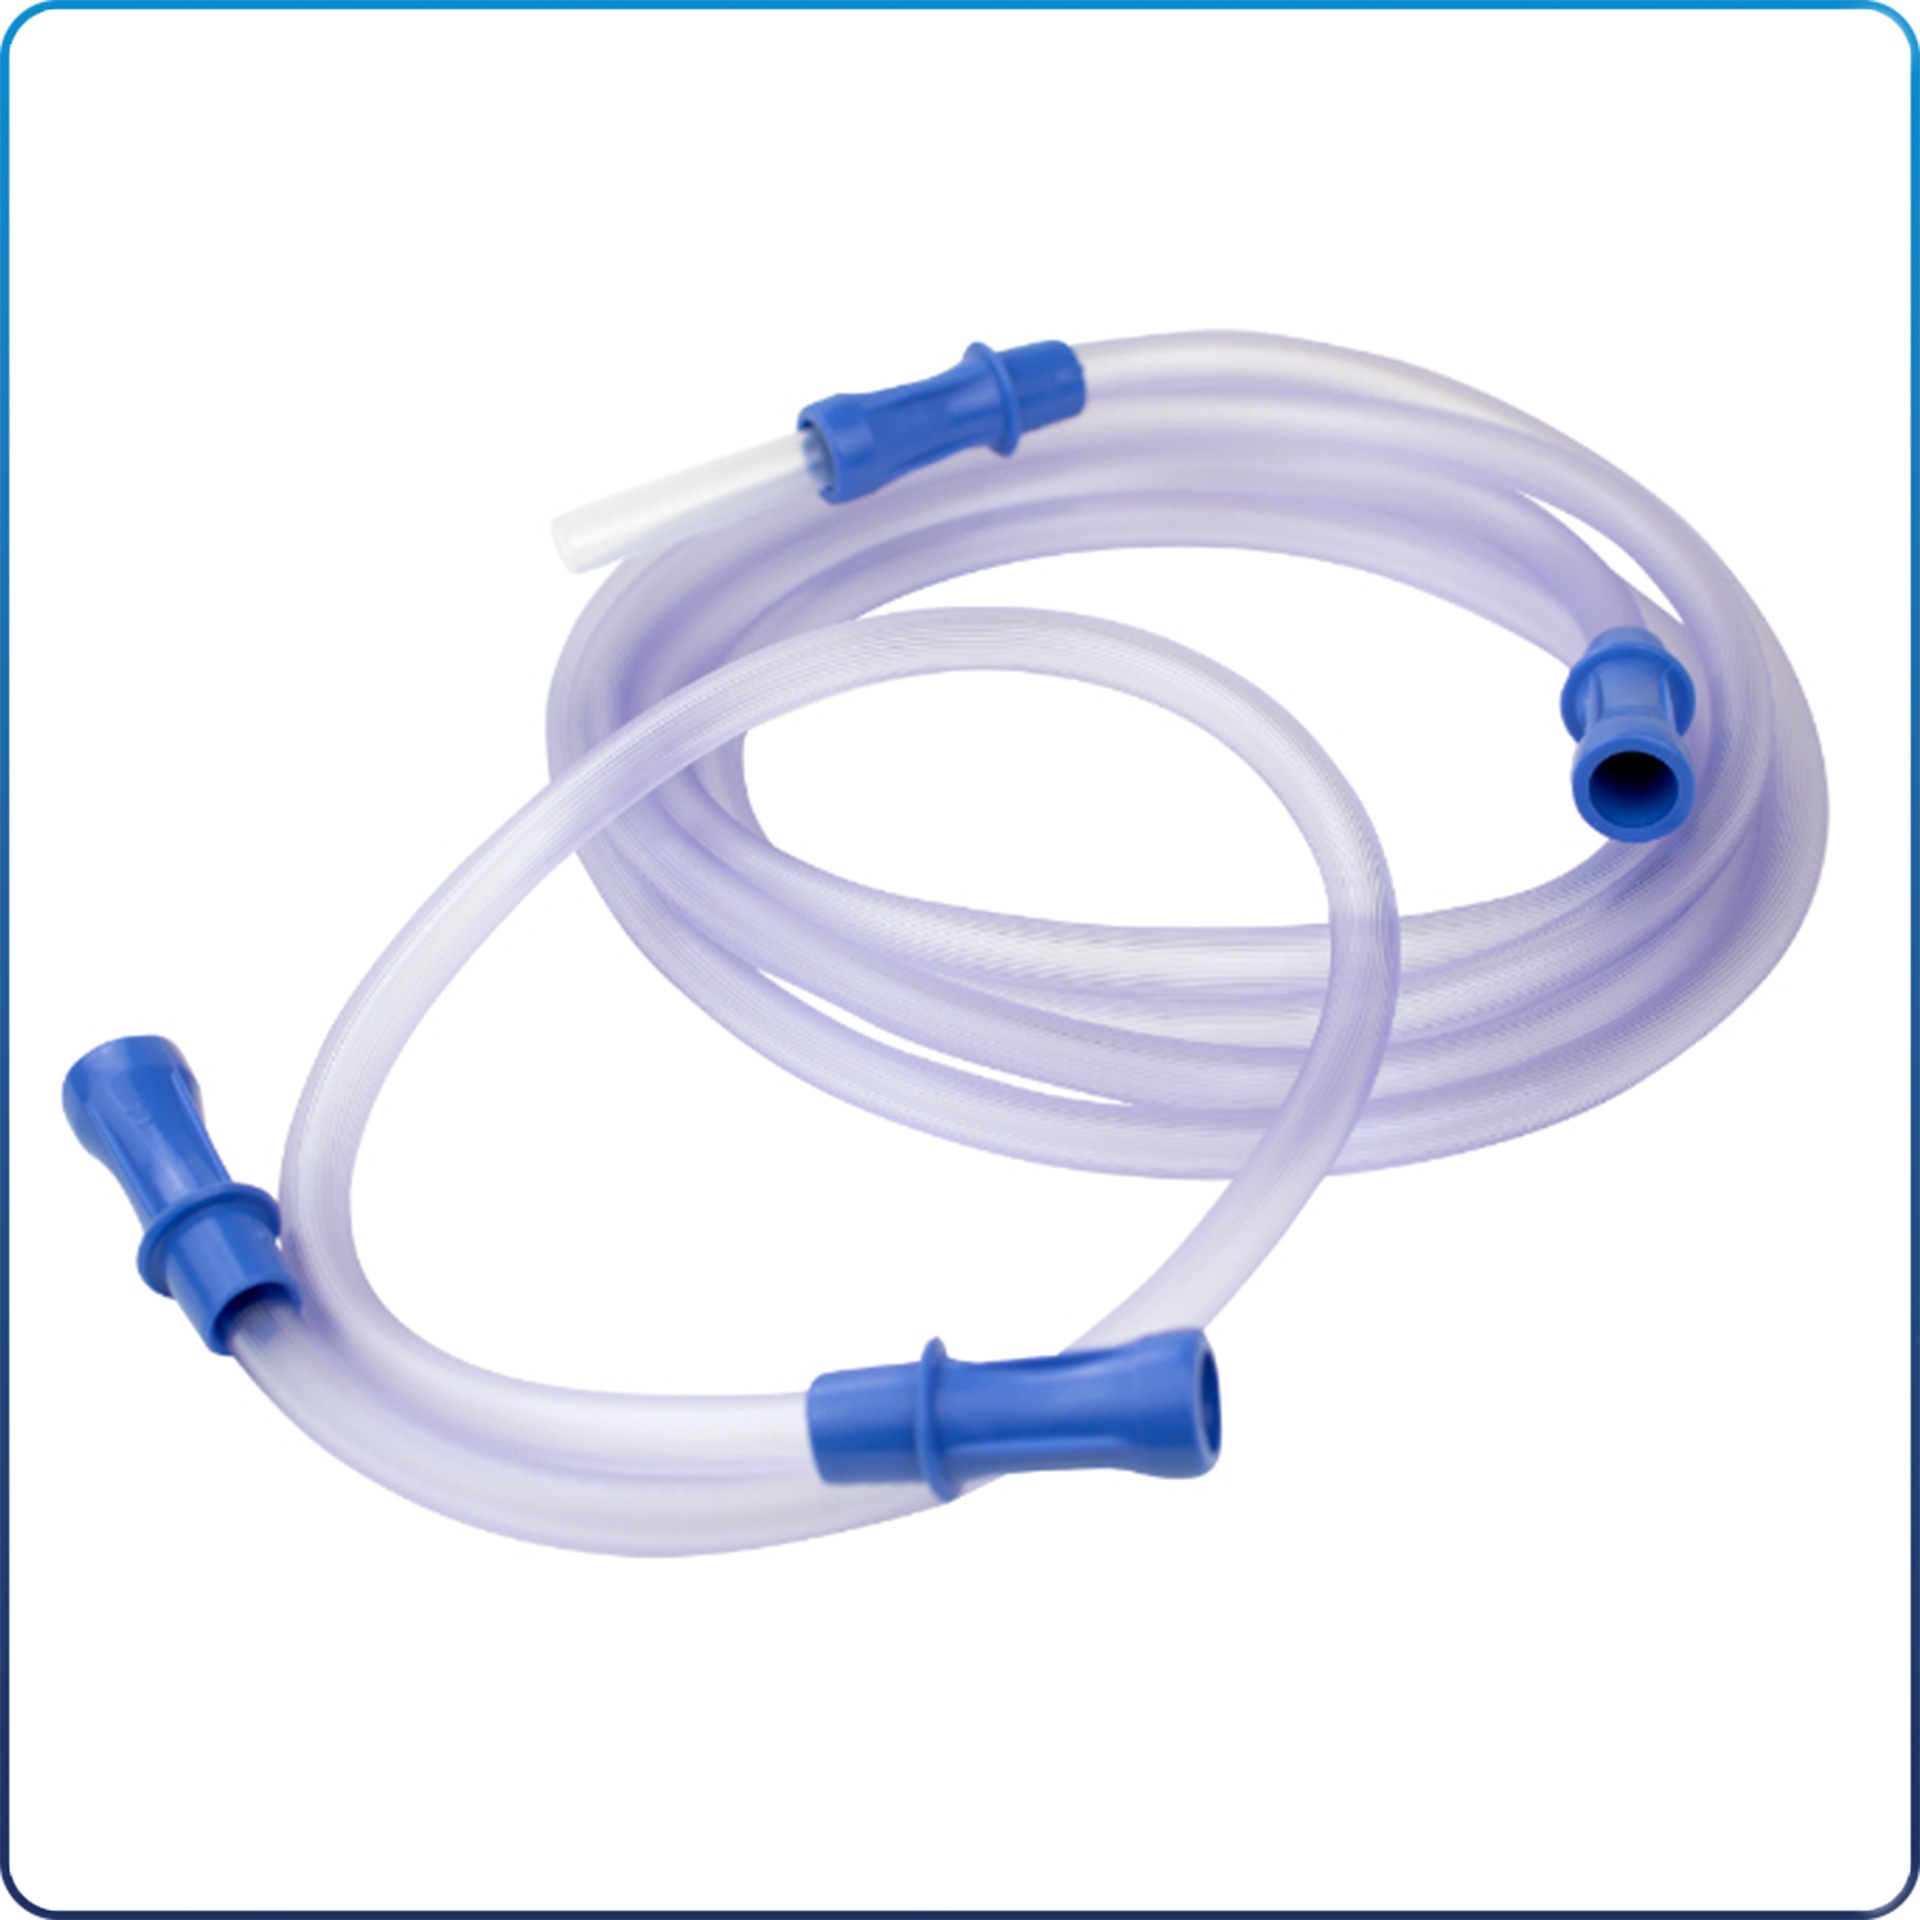 Suction Tubing with Straw Connector